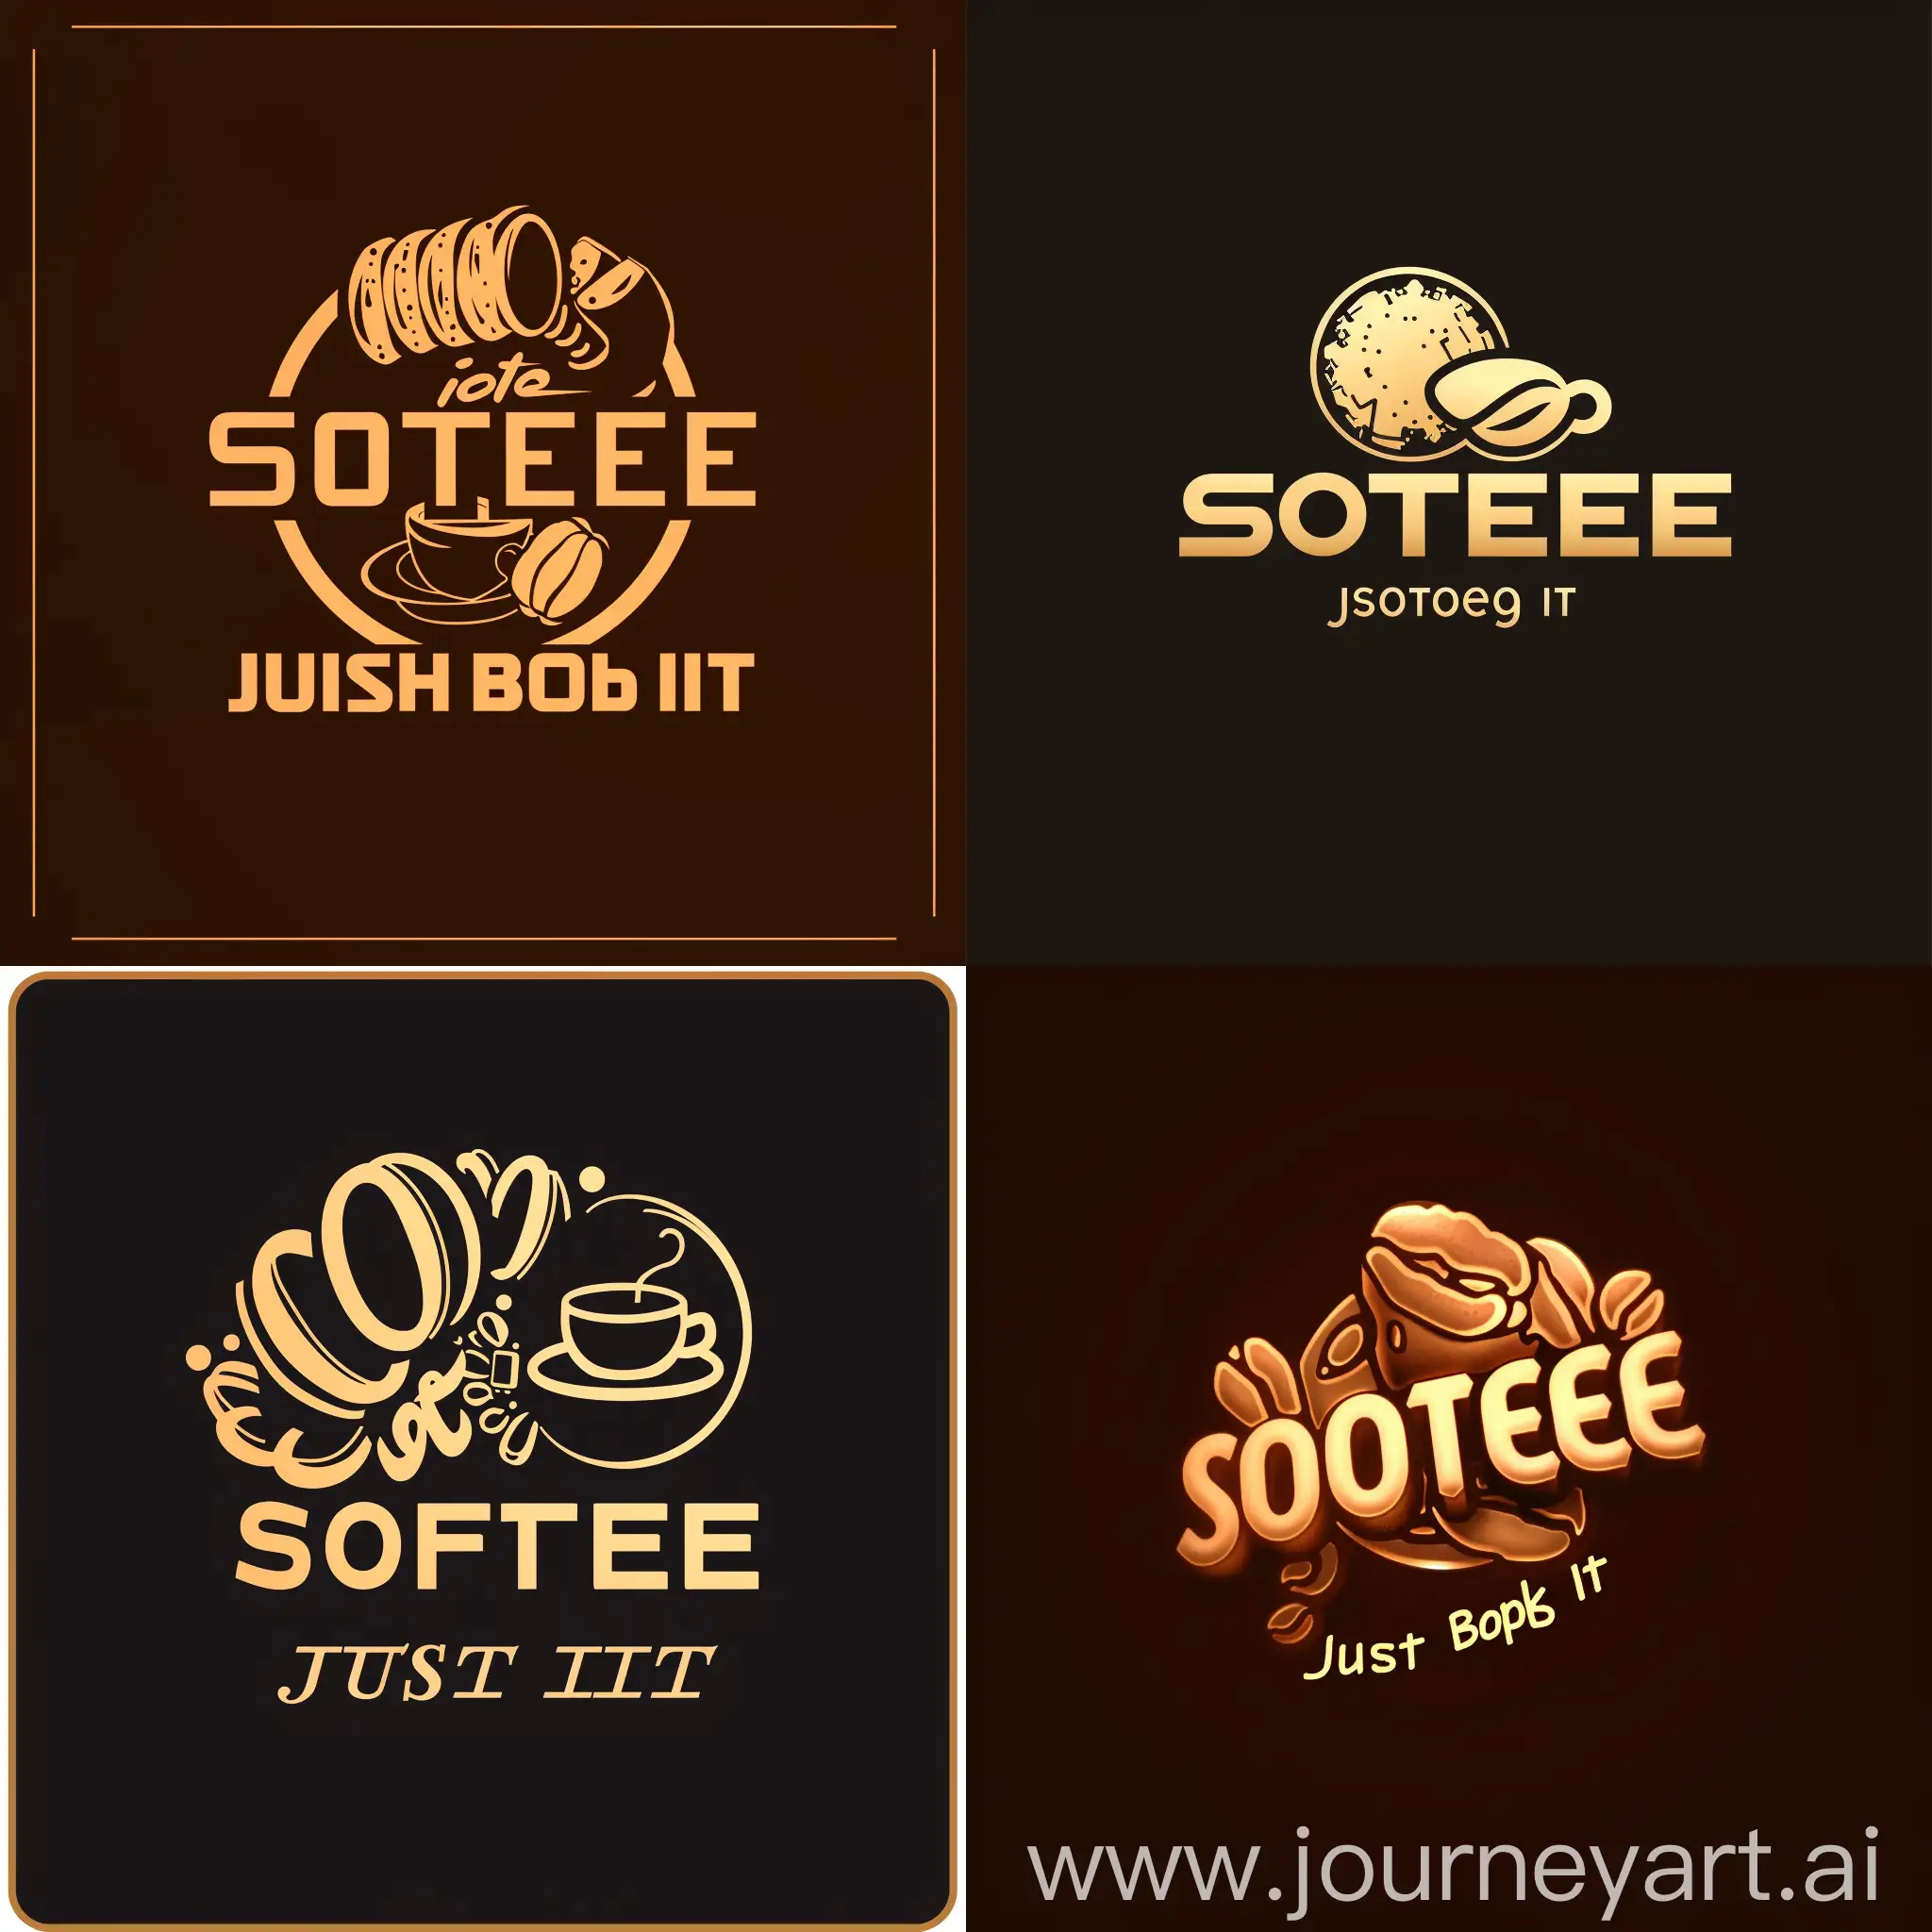 create a logo with softee word that contain combination of cpu and coffee symbol with just blog it slogan